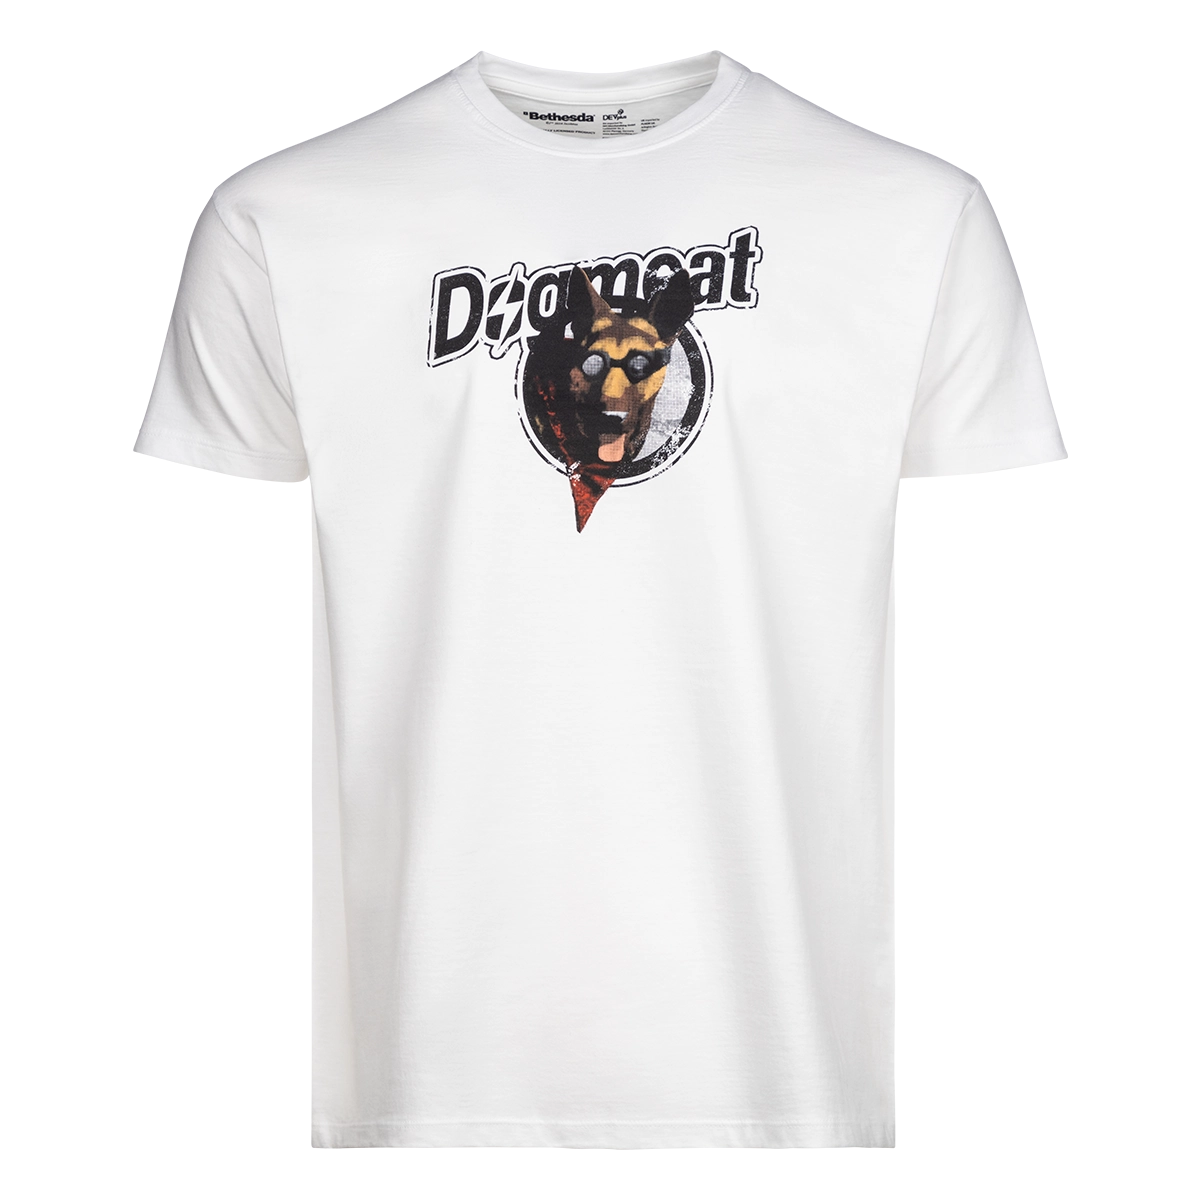 Fallout T-Shirt "Dogmeat" white L Cover